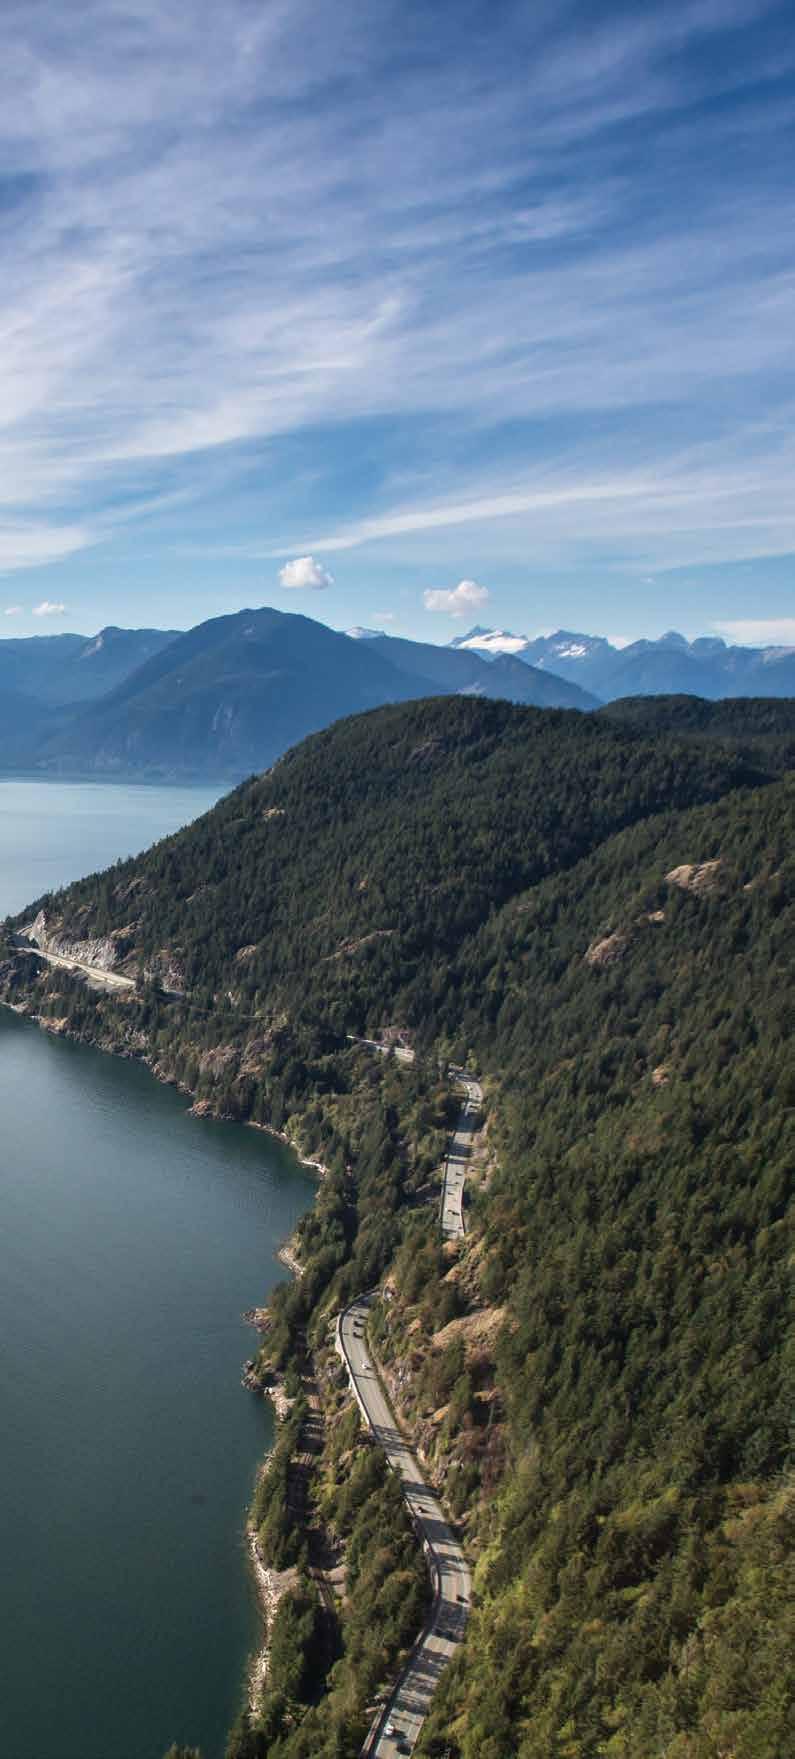 A QUICK GUIDE TO THIS ROUTE. A three-day route connecting Seattle, Washington, to Lake Louise or Banff, with overnight hotel stays in Vancouver and Kamloops.